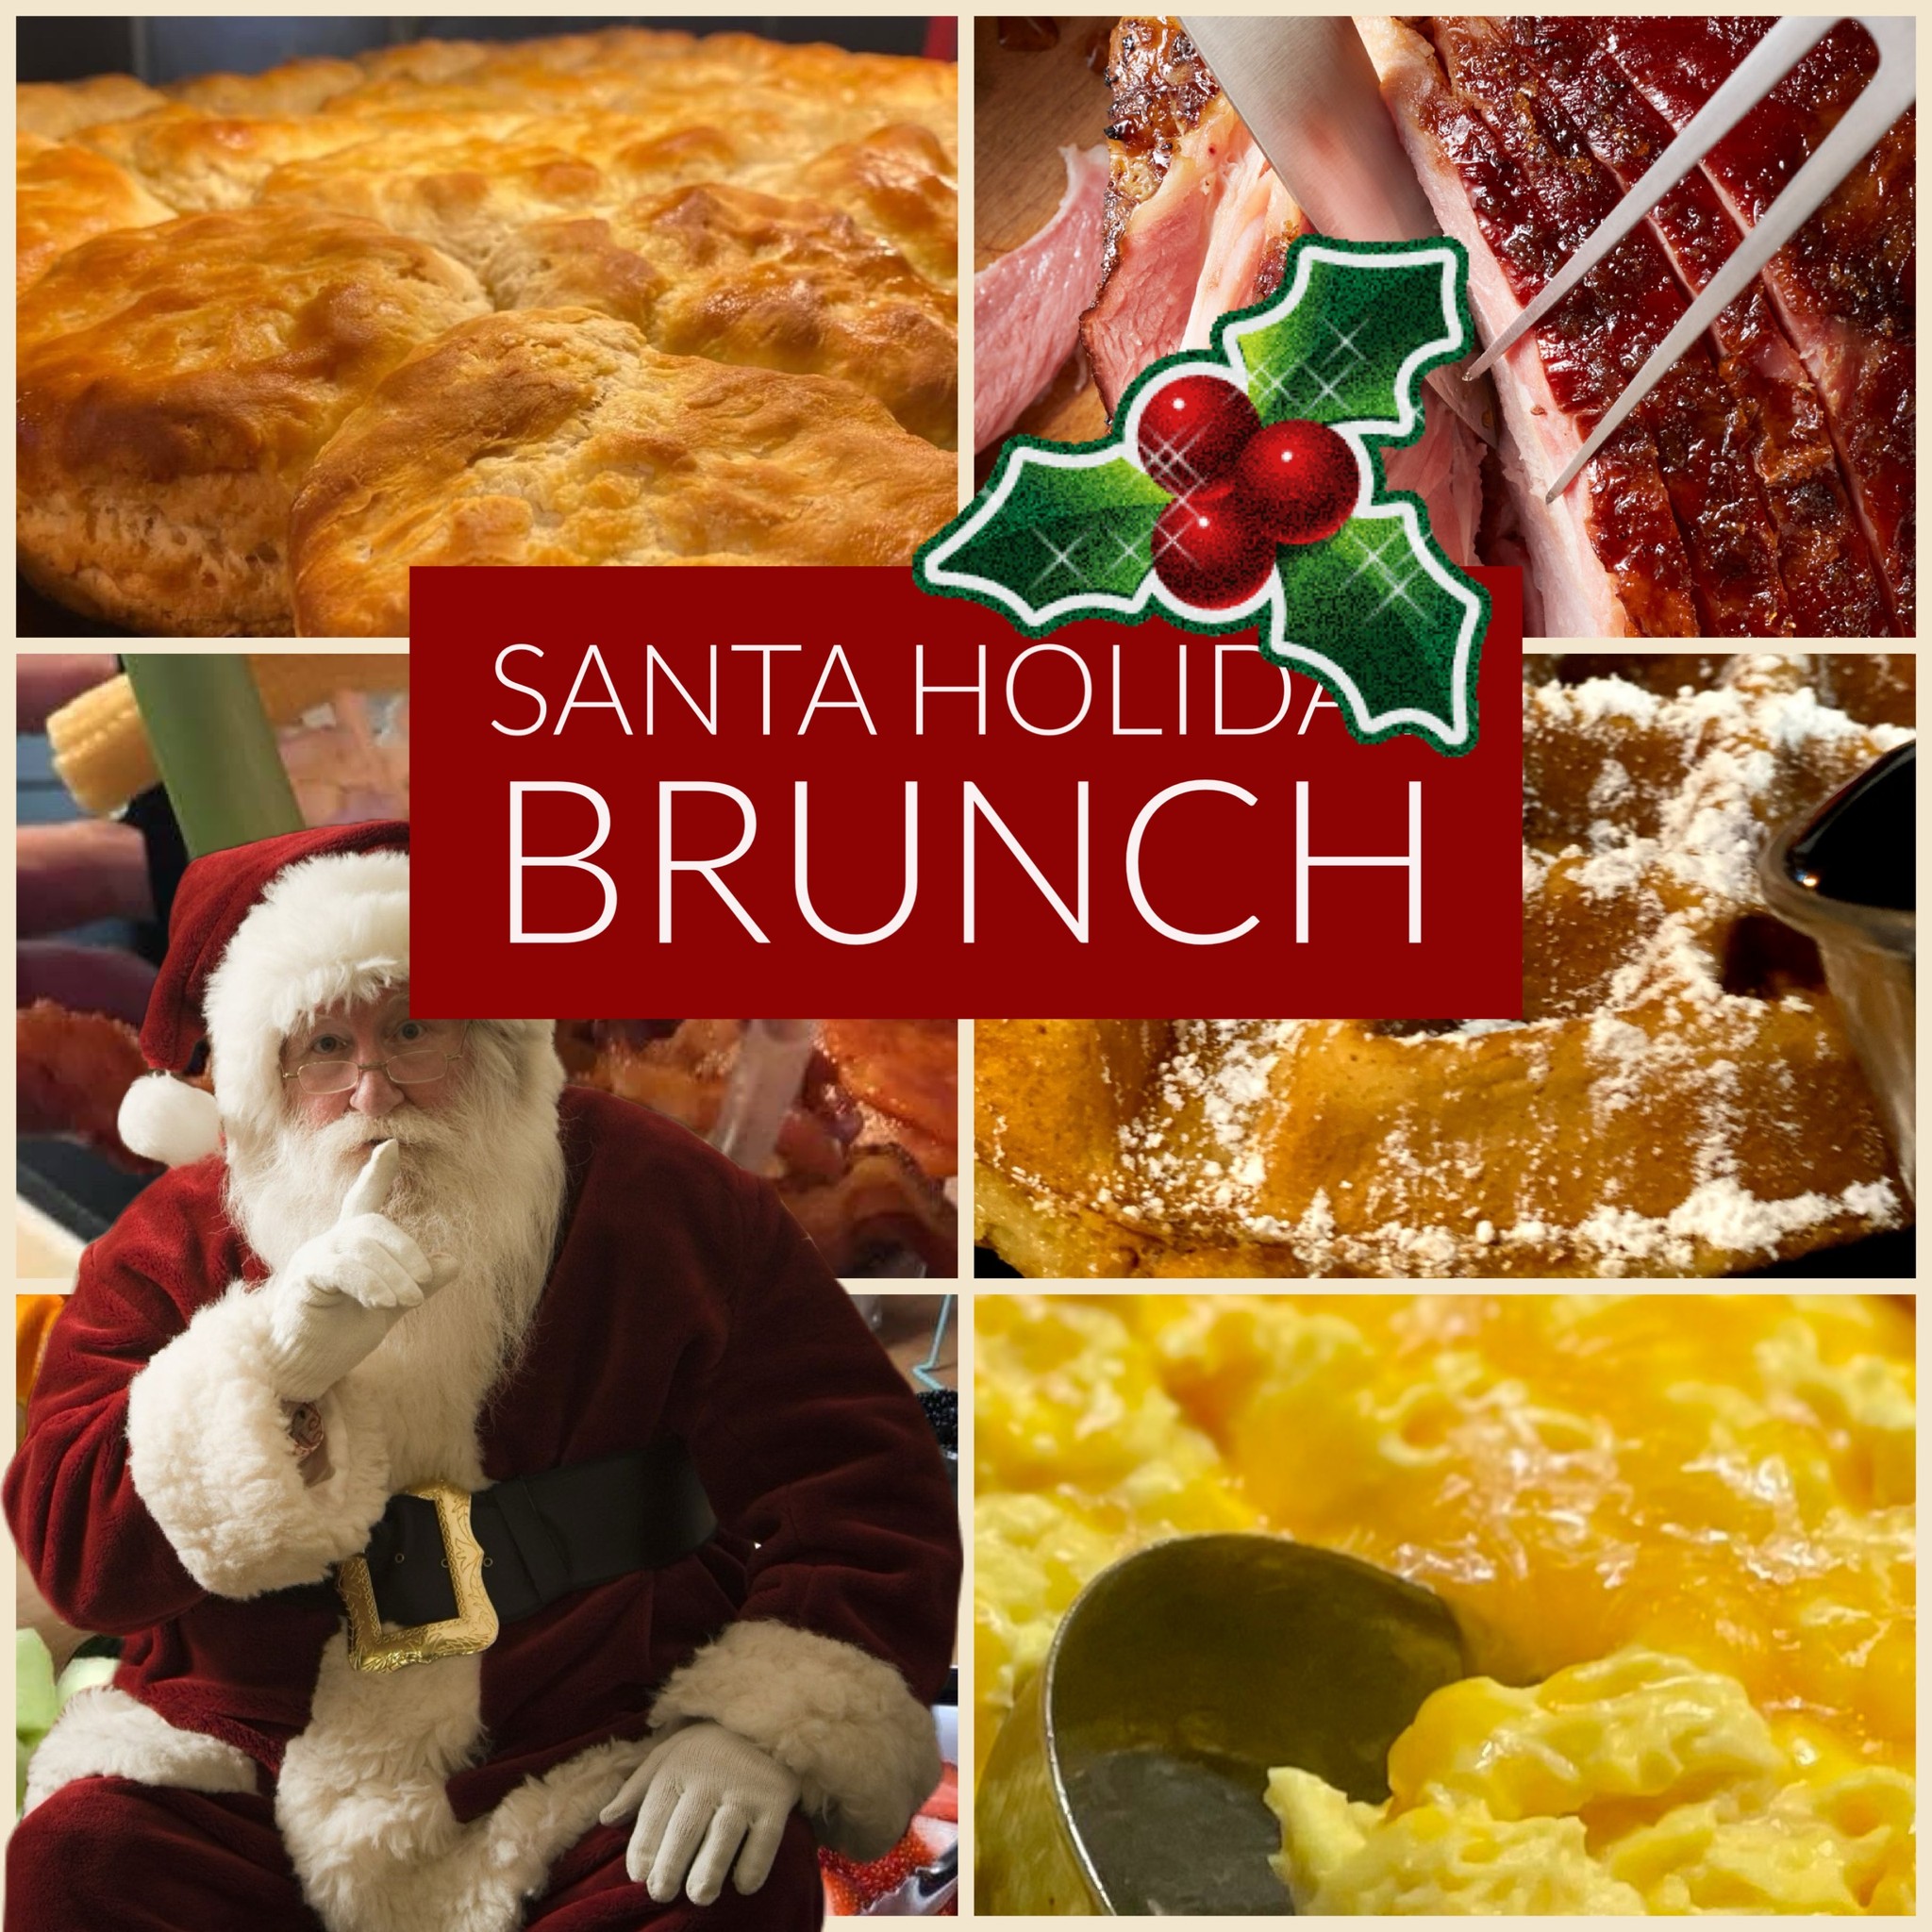 Event Poster shows Santa and traditional brunch items